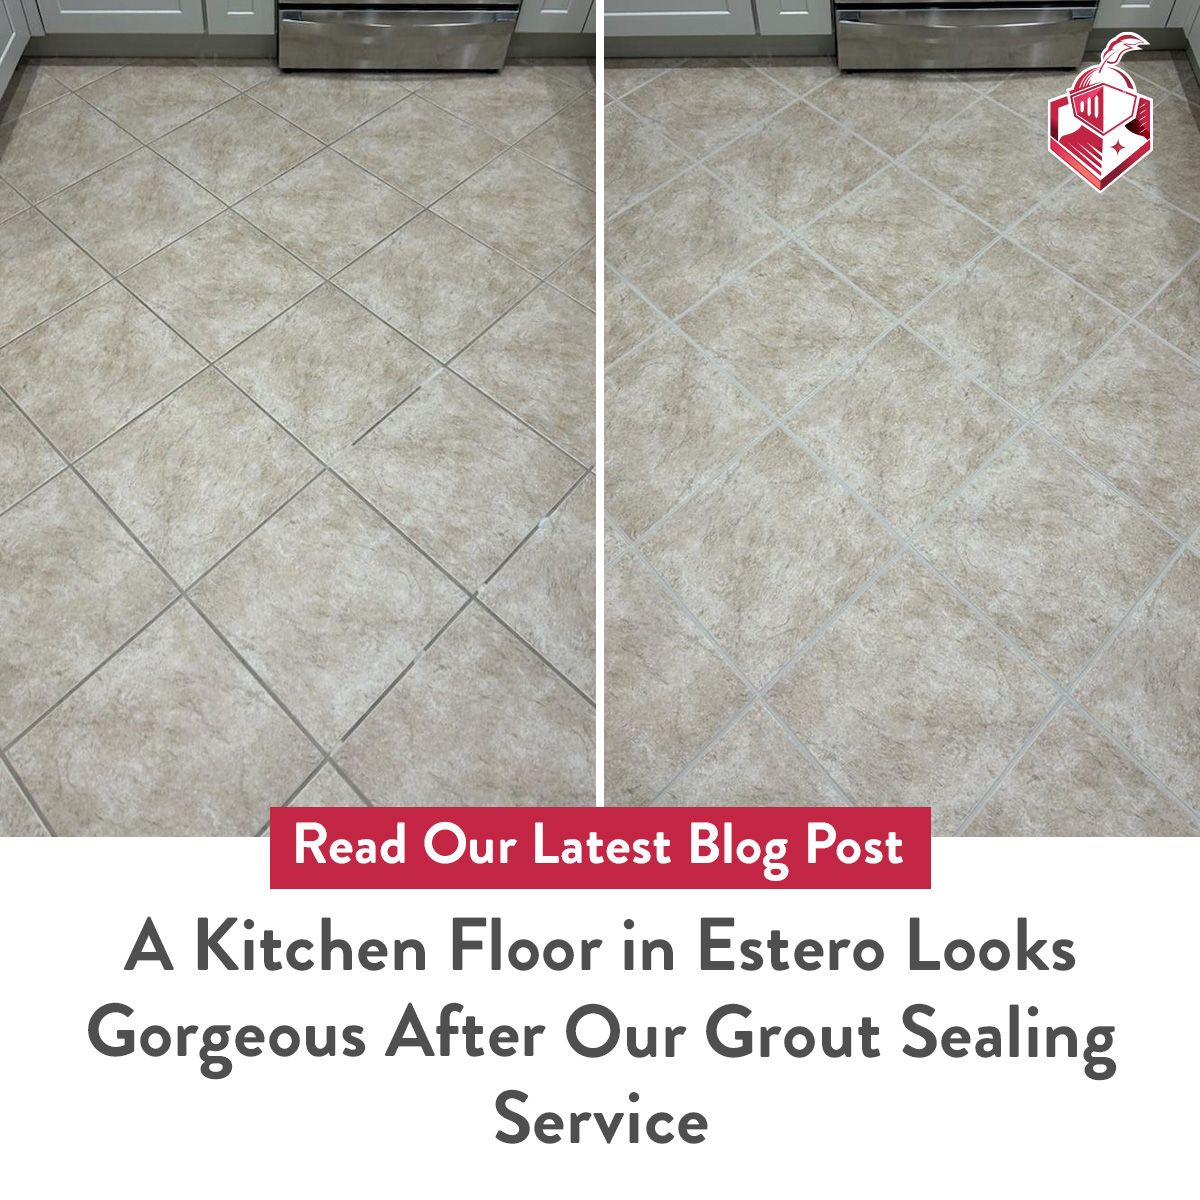 A Kitchen Floor in Estero Looks Gorgeous After Our Grout Sealing Service